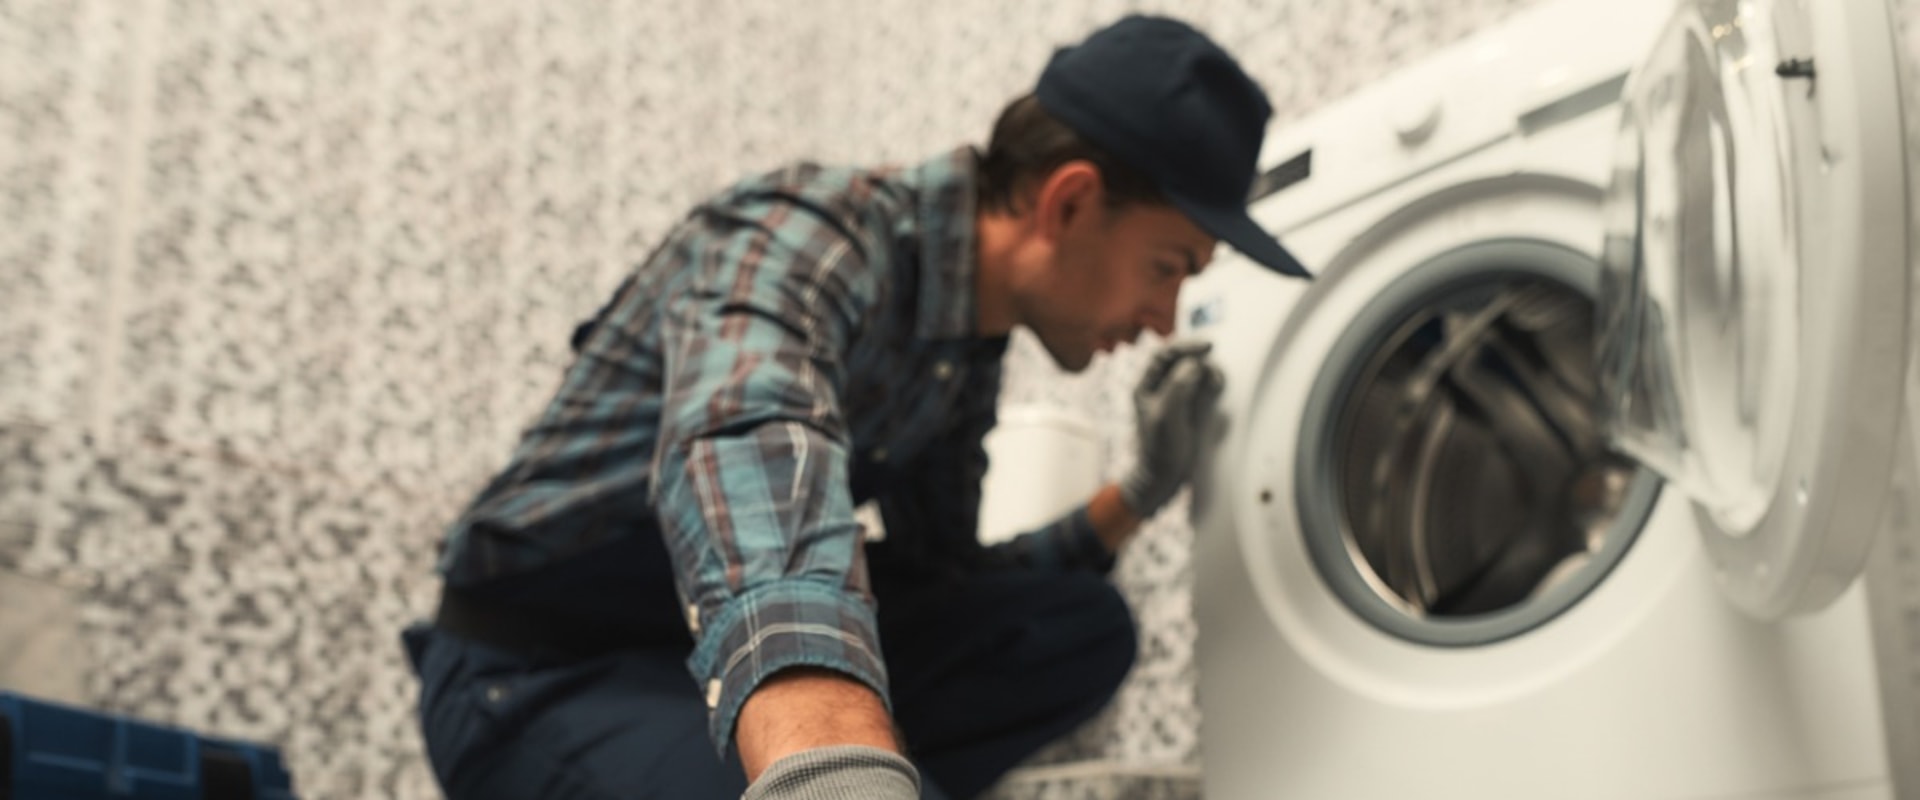 What kind of training is required to become an appliance repair technician?